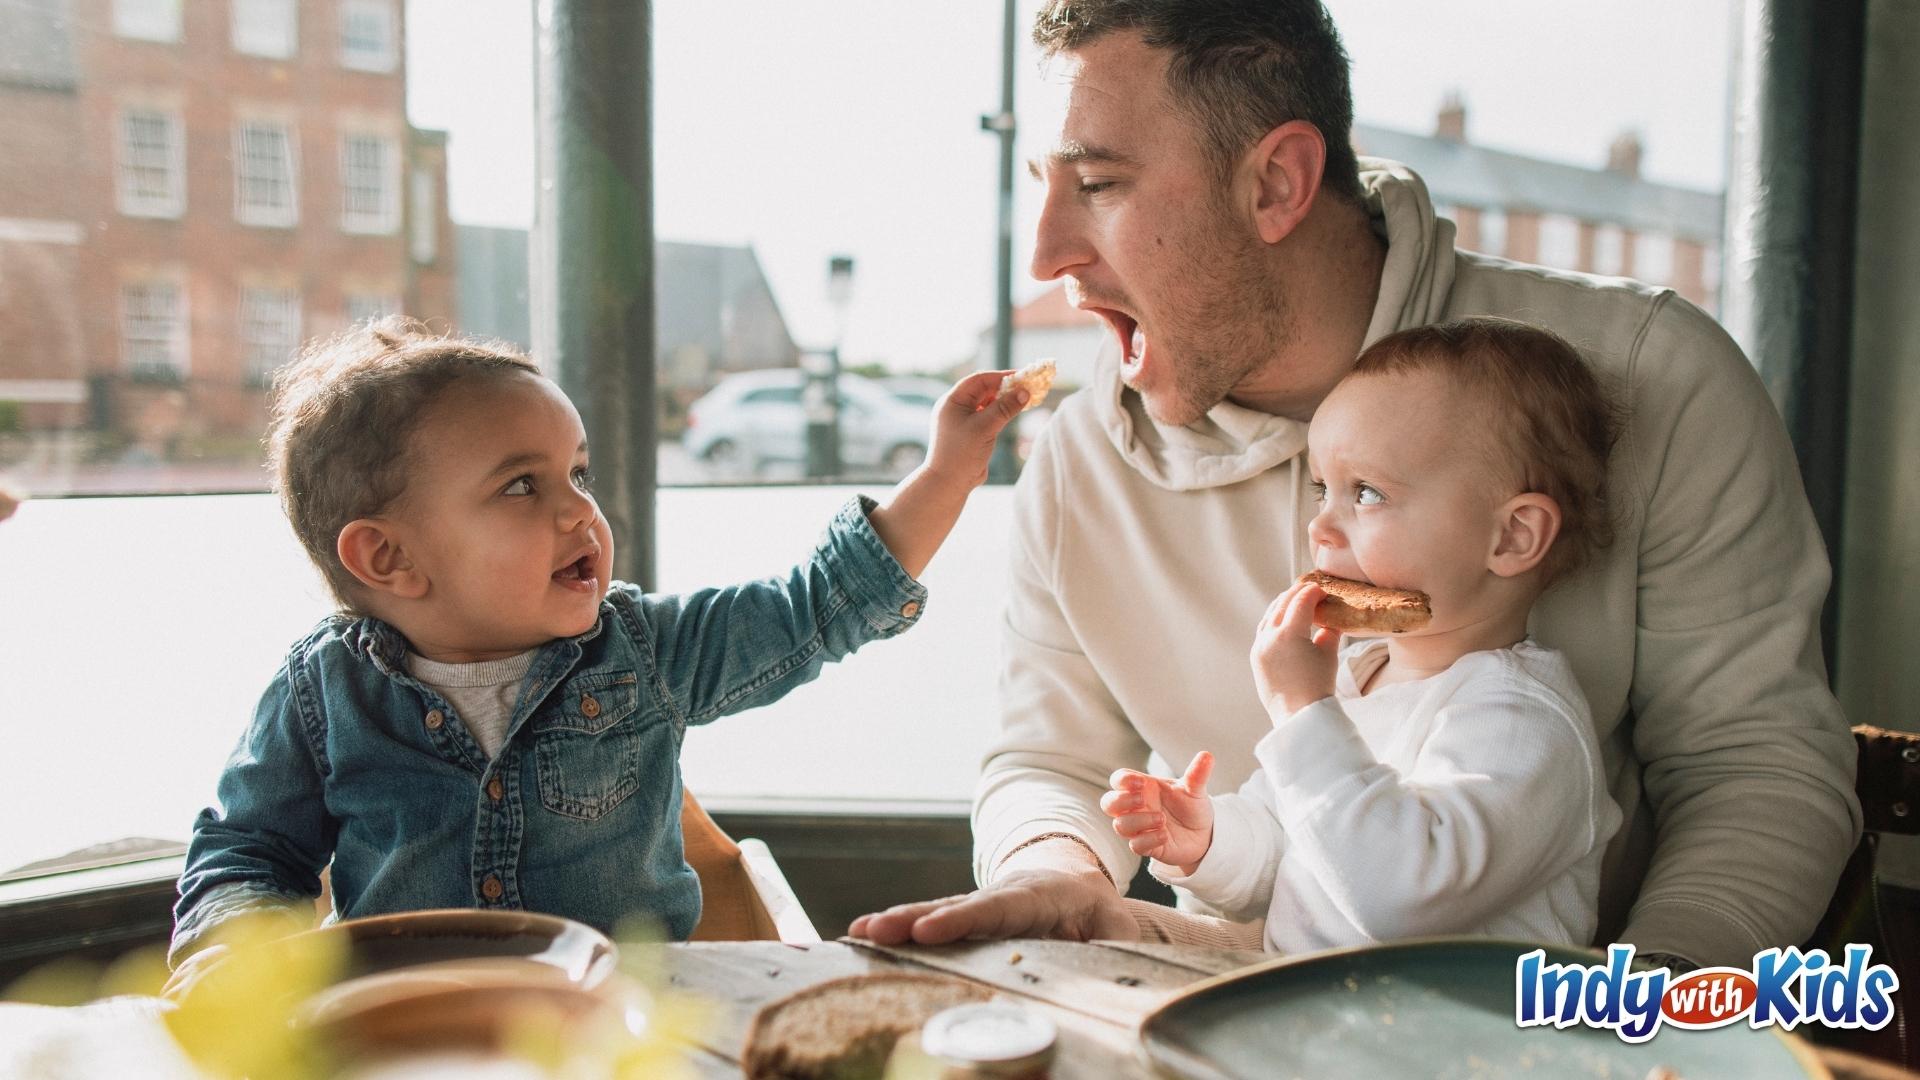 Dad eating pizza with kids